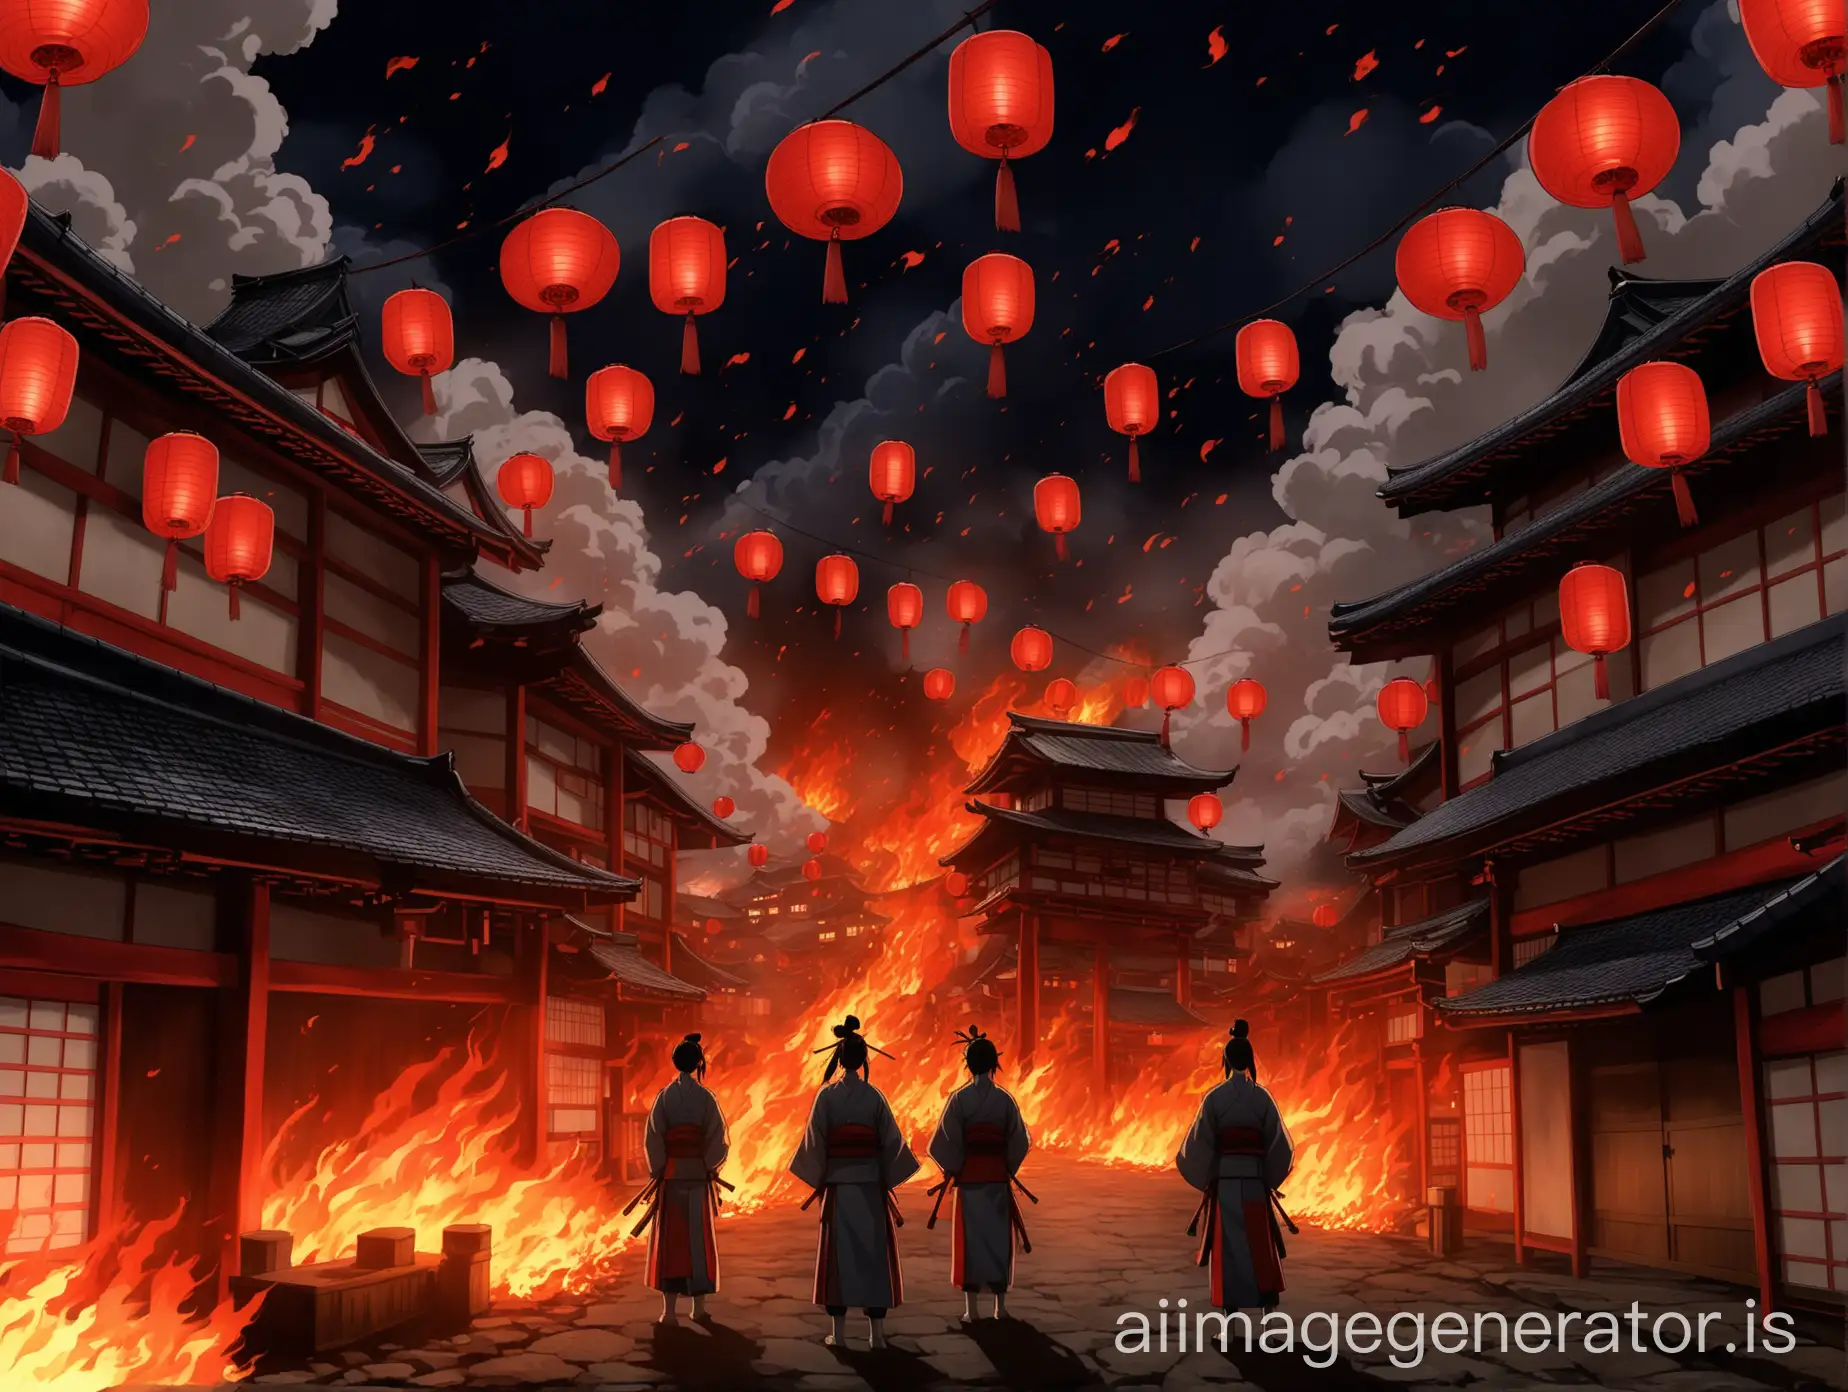 anime scenery, feudal japan, red paper lanterns, buildings on fire, plumes of smoke, nighttime